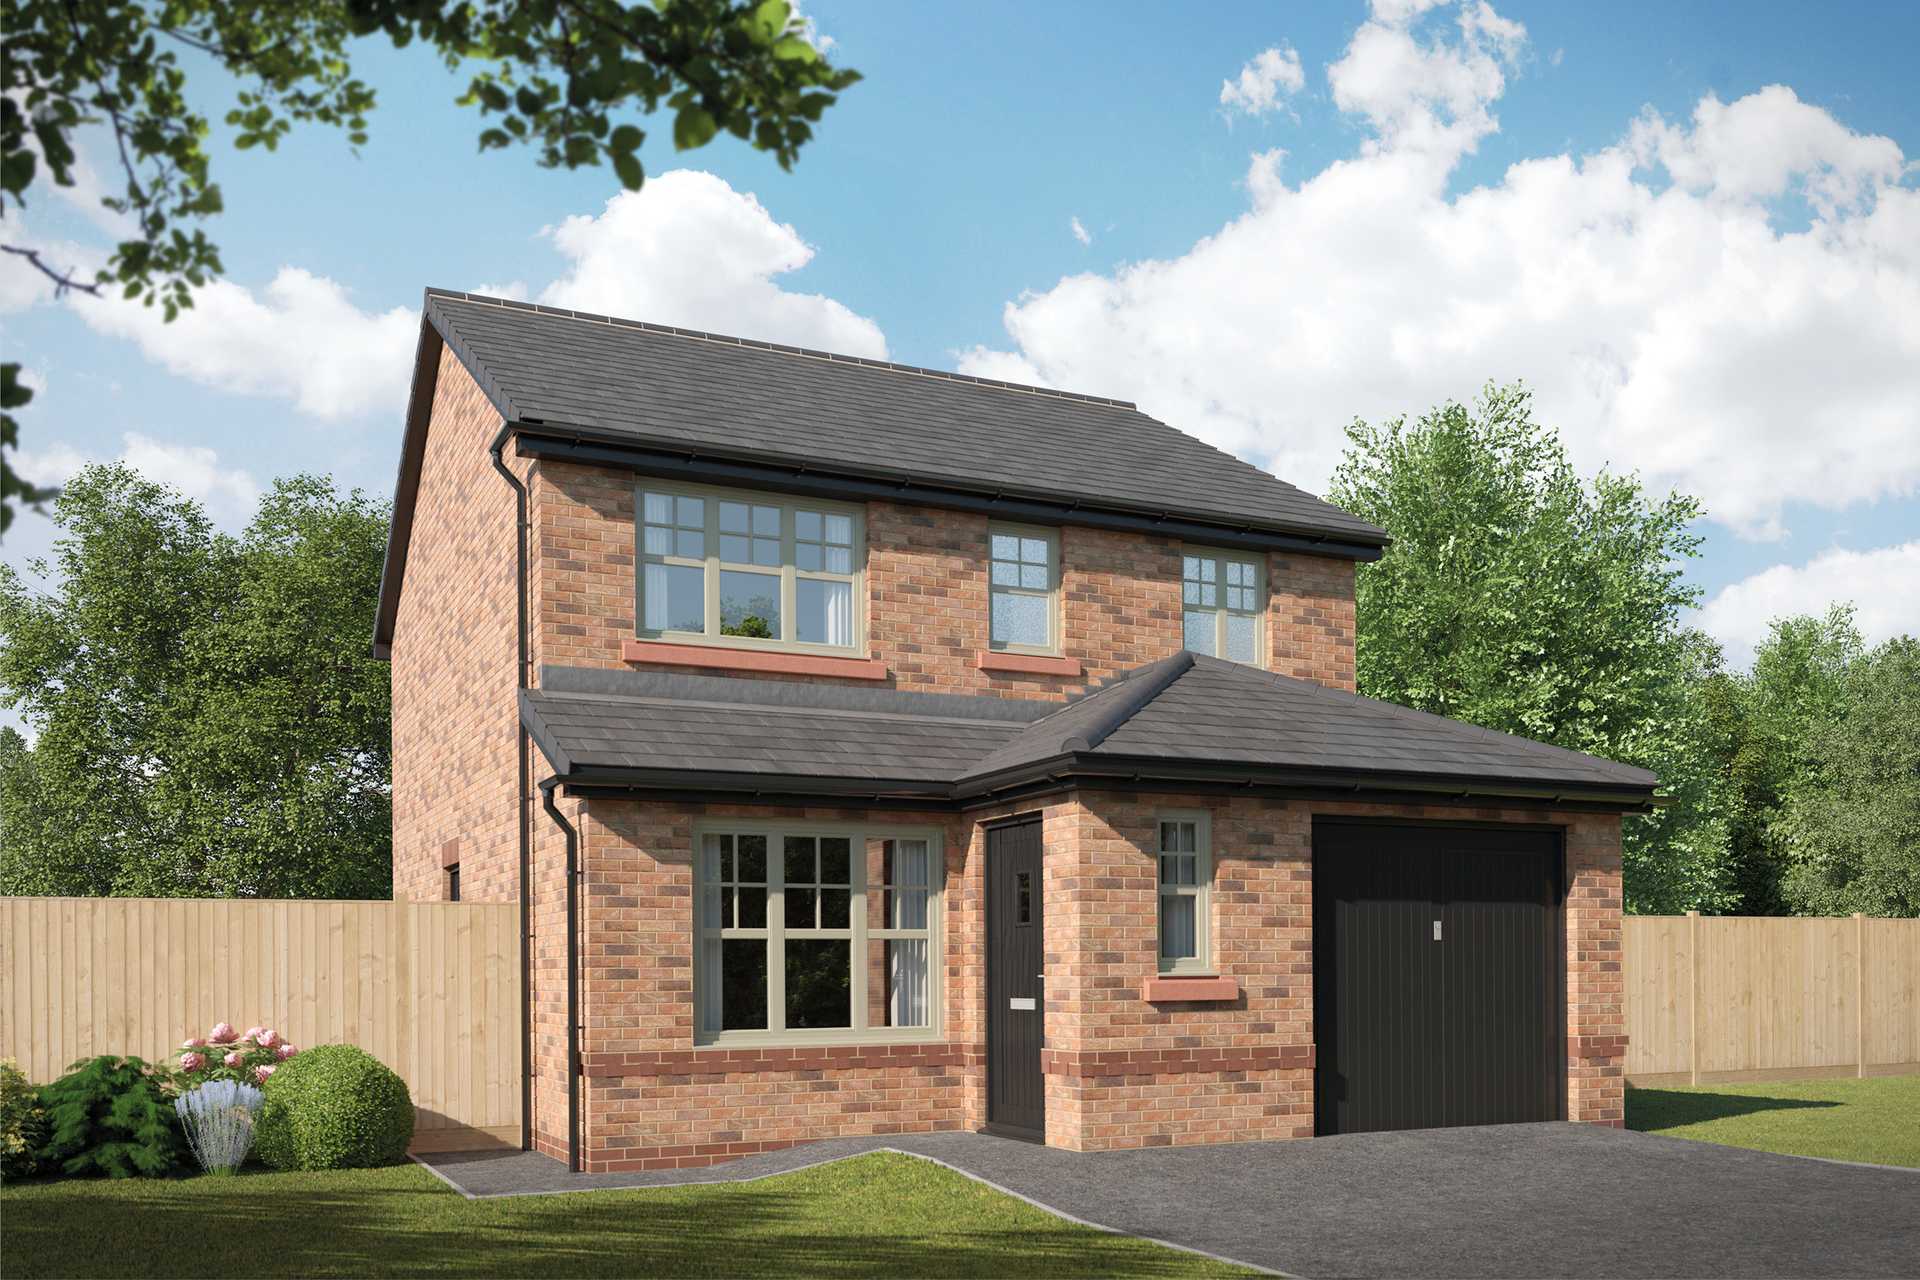 House in Macclesfield, Cheshire East 10063701